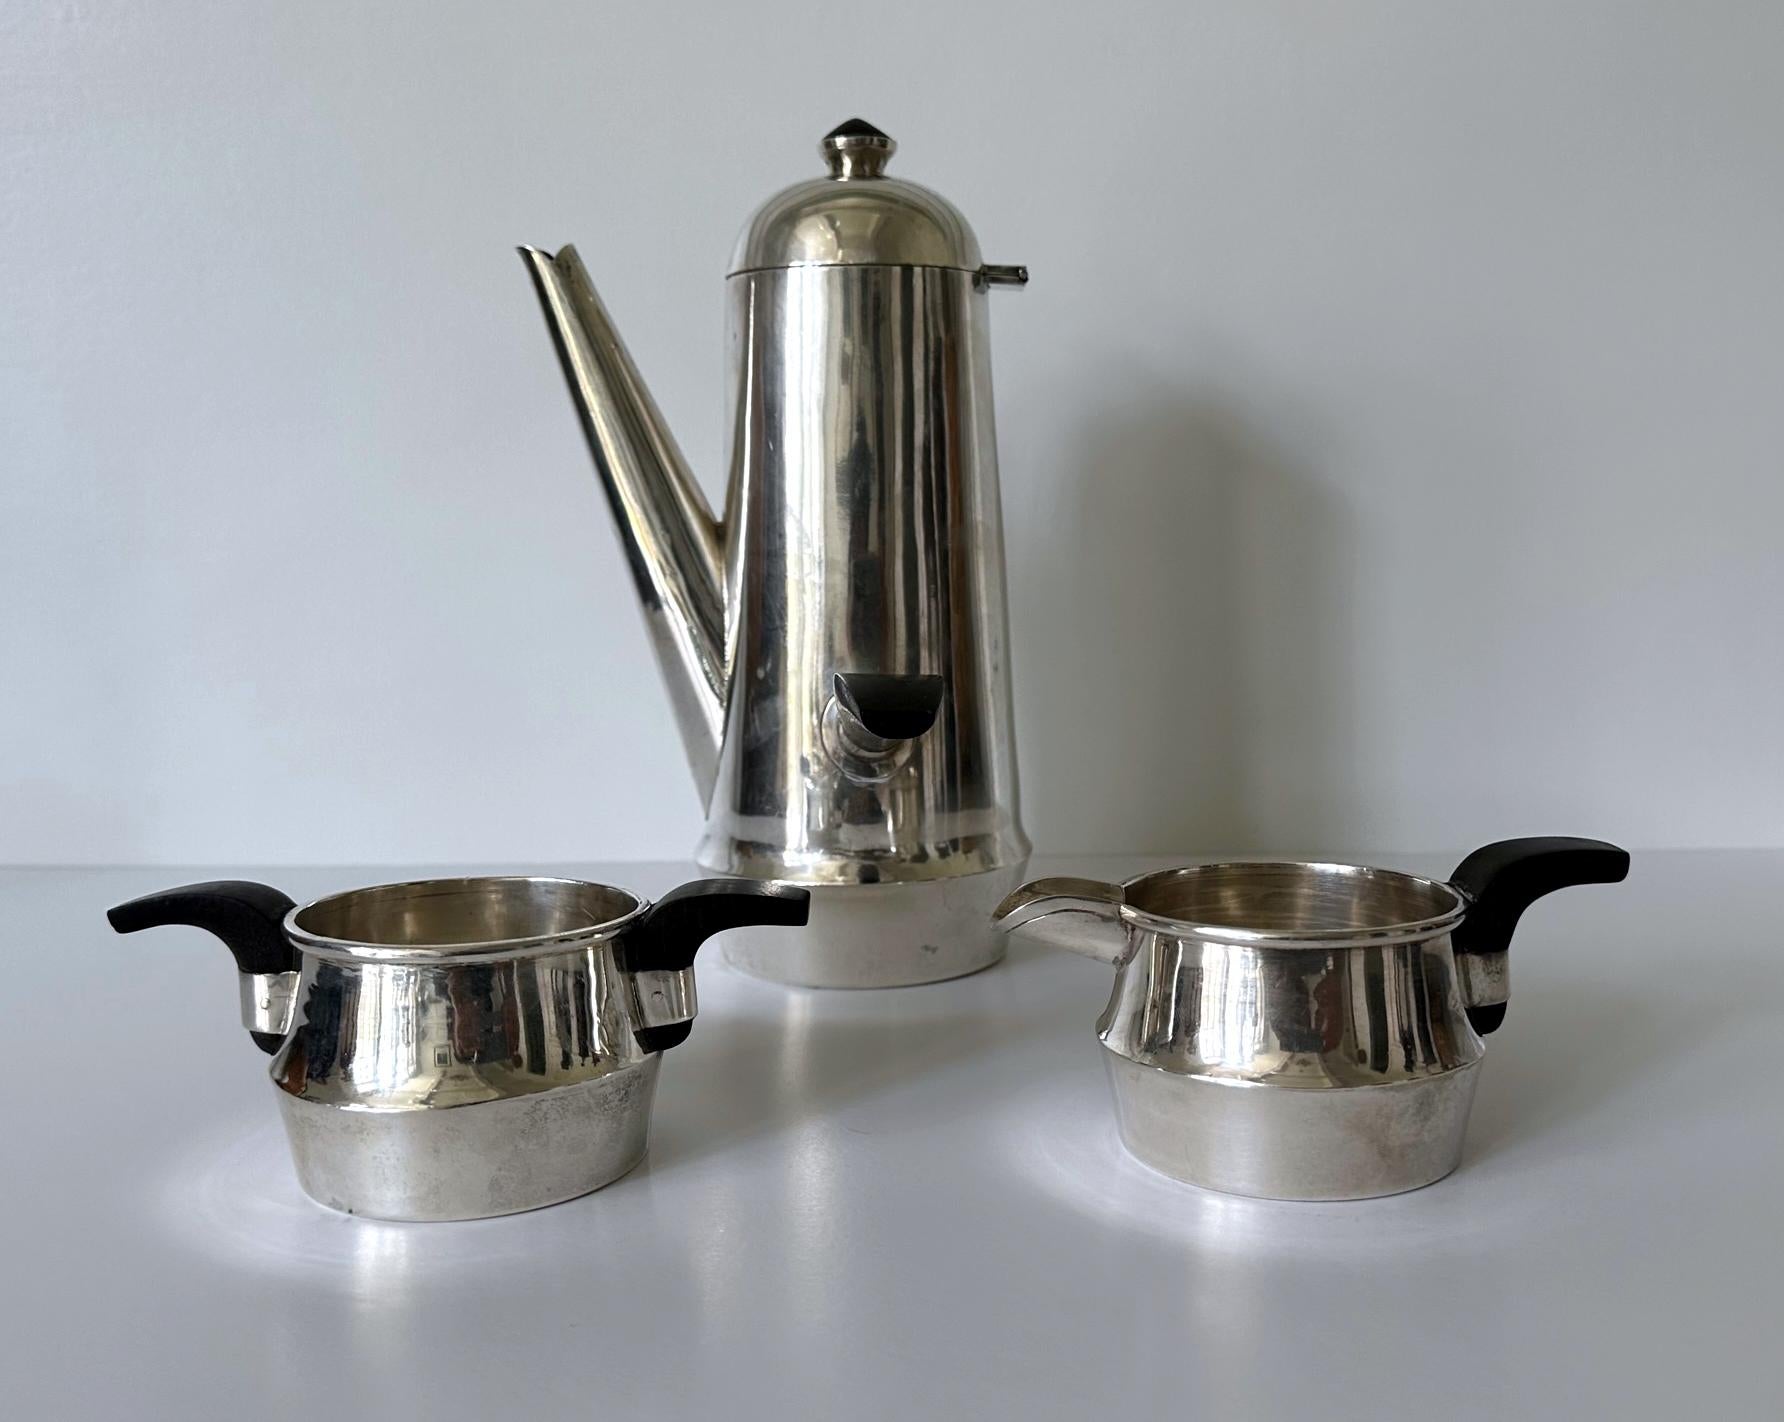 A lovely set of coffee service consisting of a large coffee pot, a sugar and a creamer (this set is of the largest size of this particular model we have seen so far). Made from sterling silver and ebony handles and knobs, the stylish mid-century